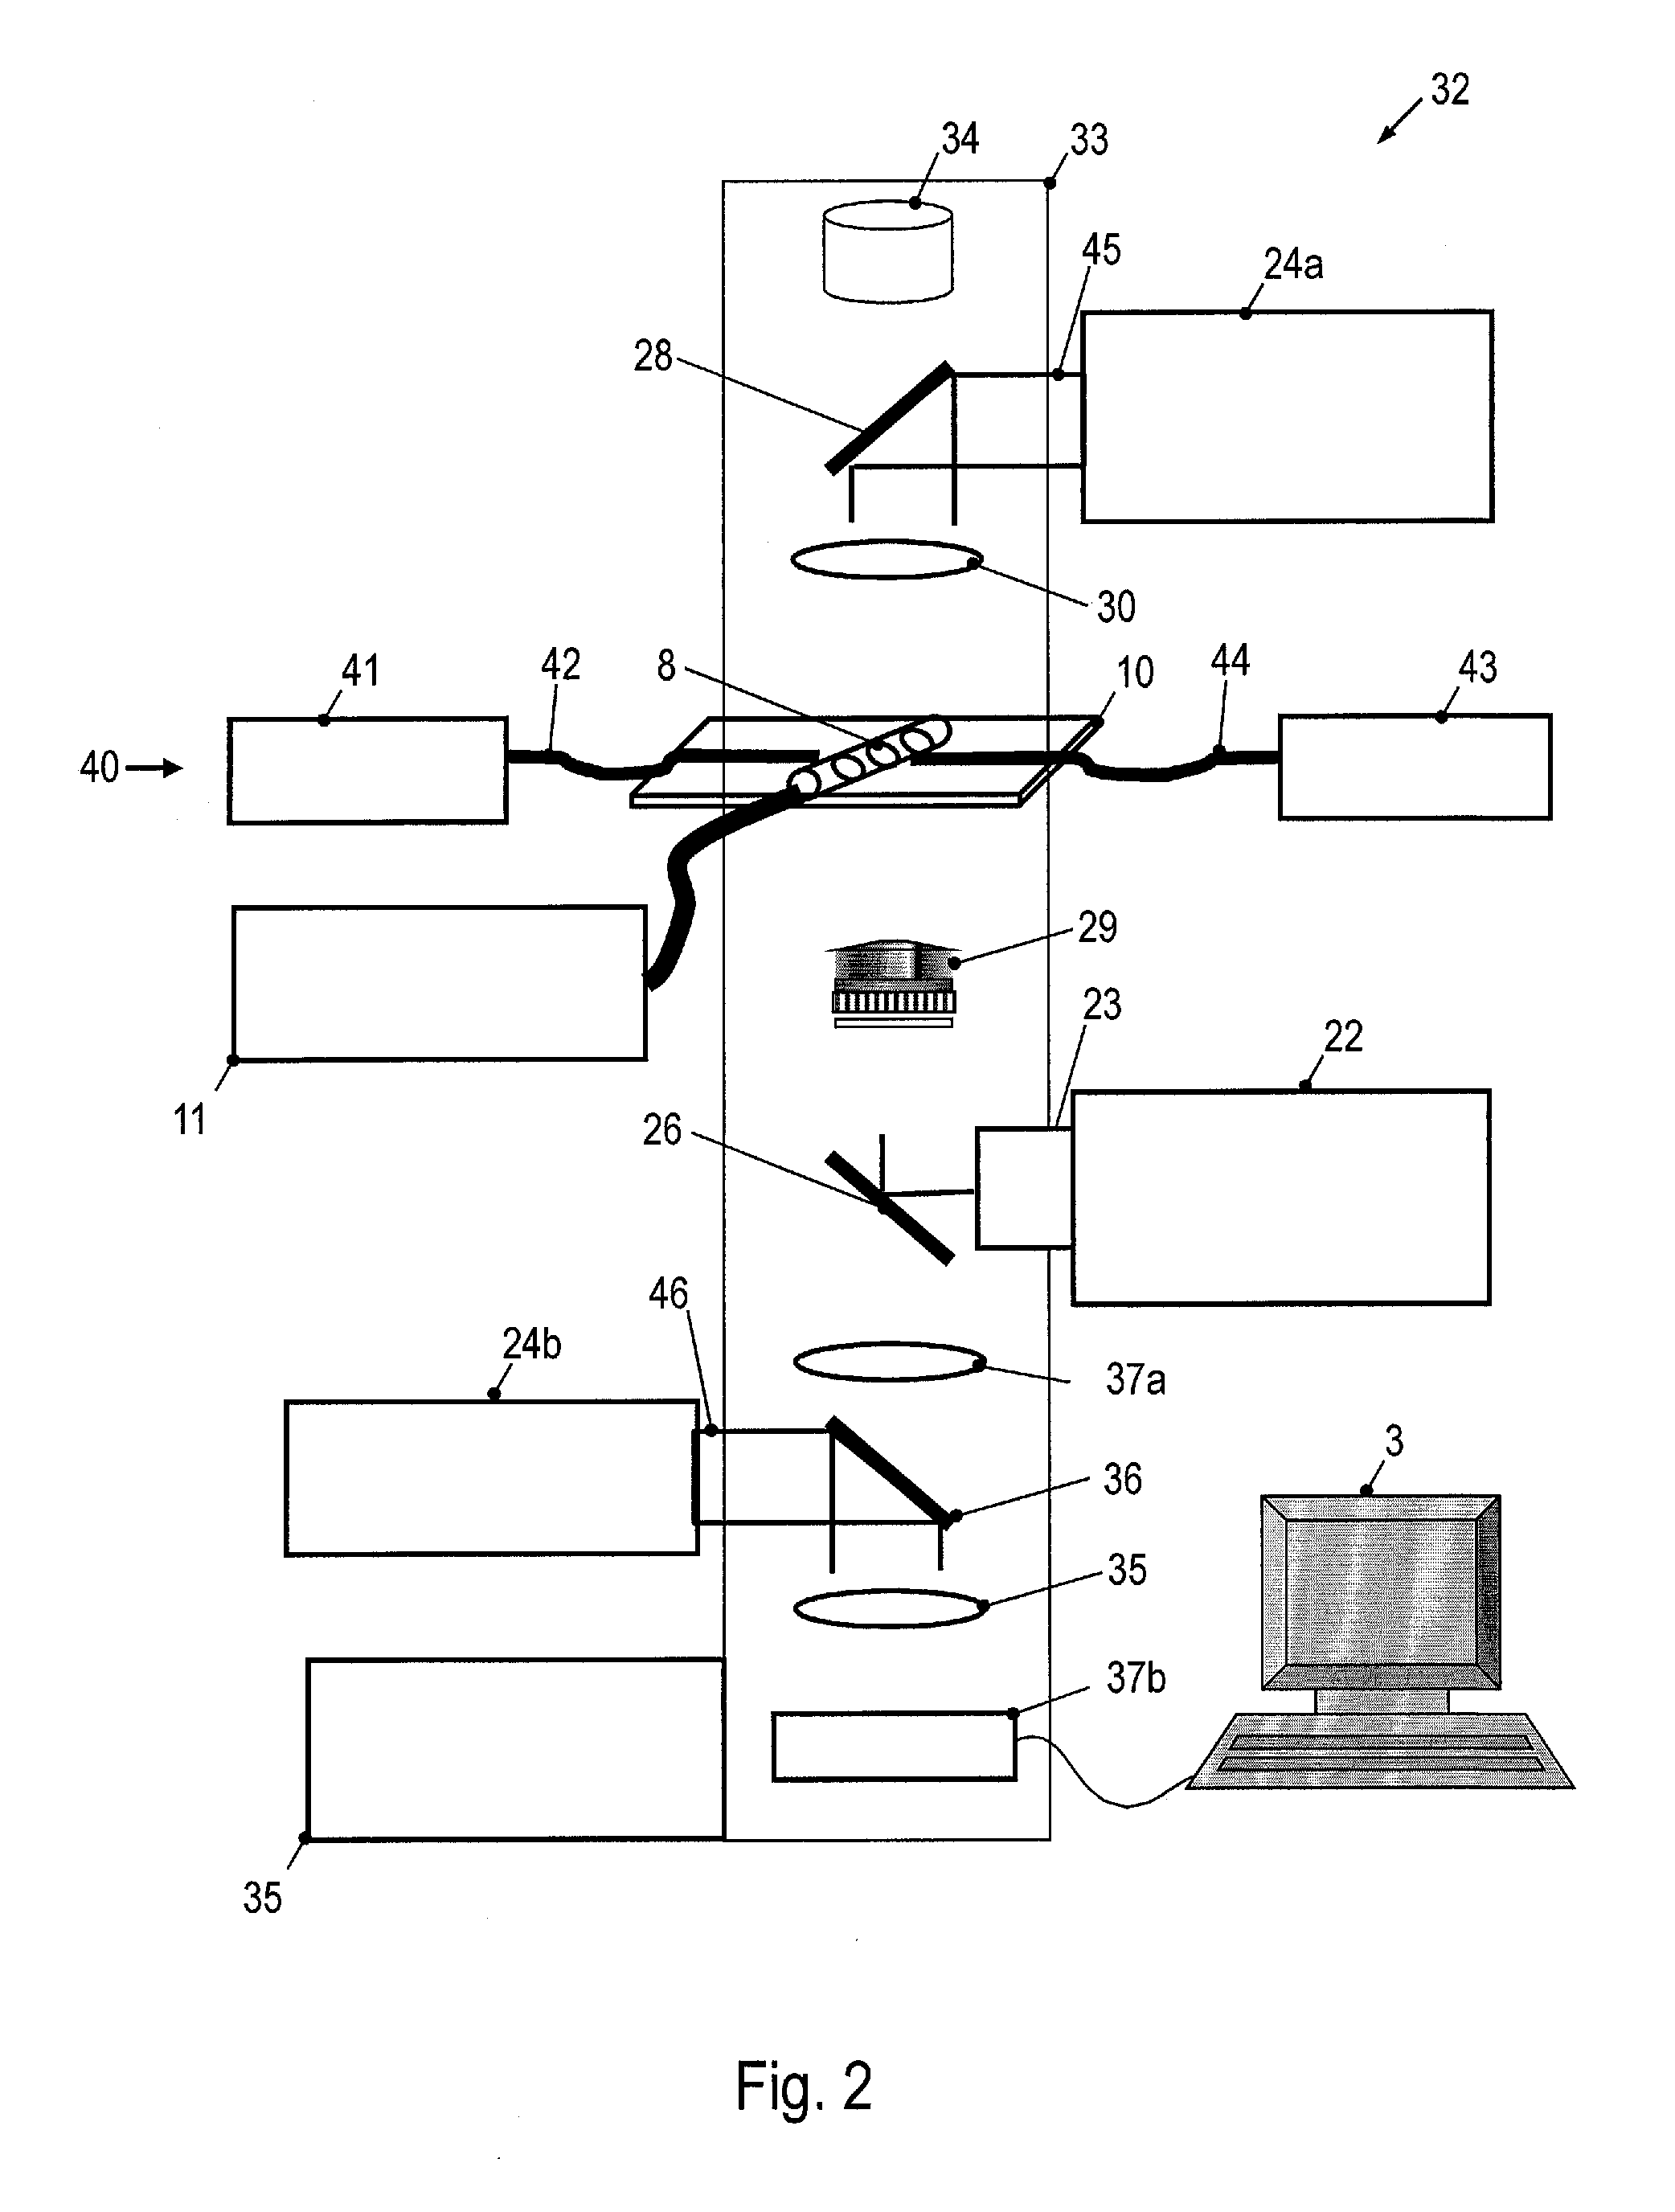 Method and apparatus for characterizing biological objects